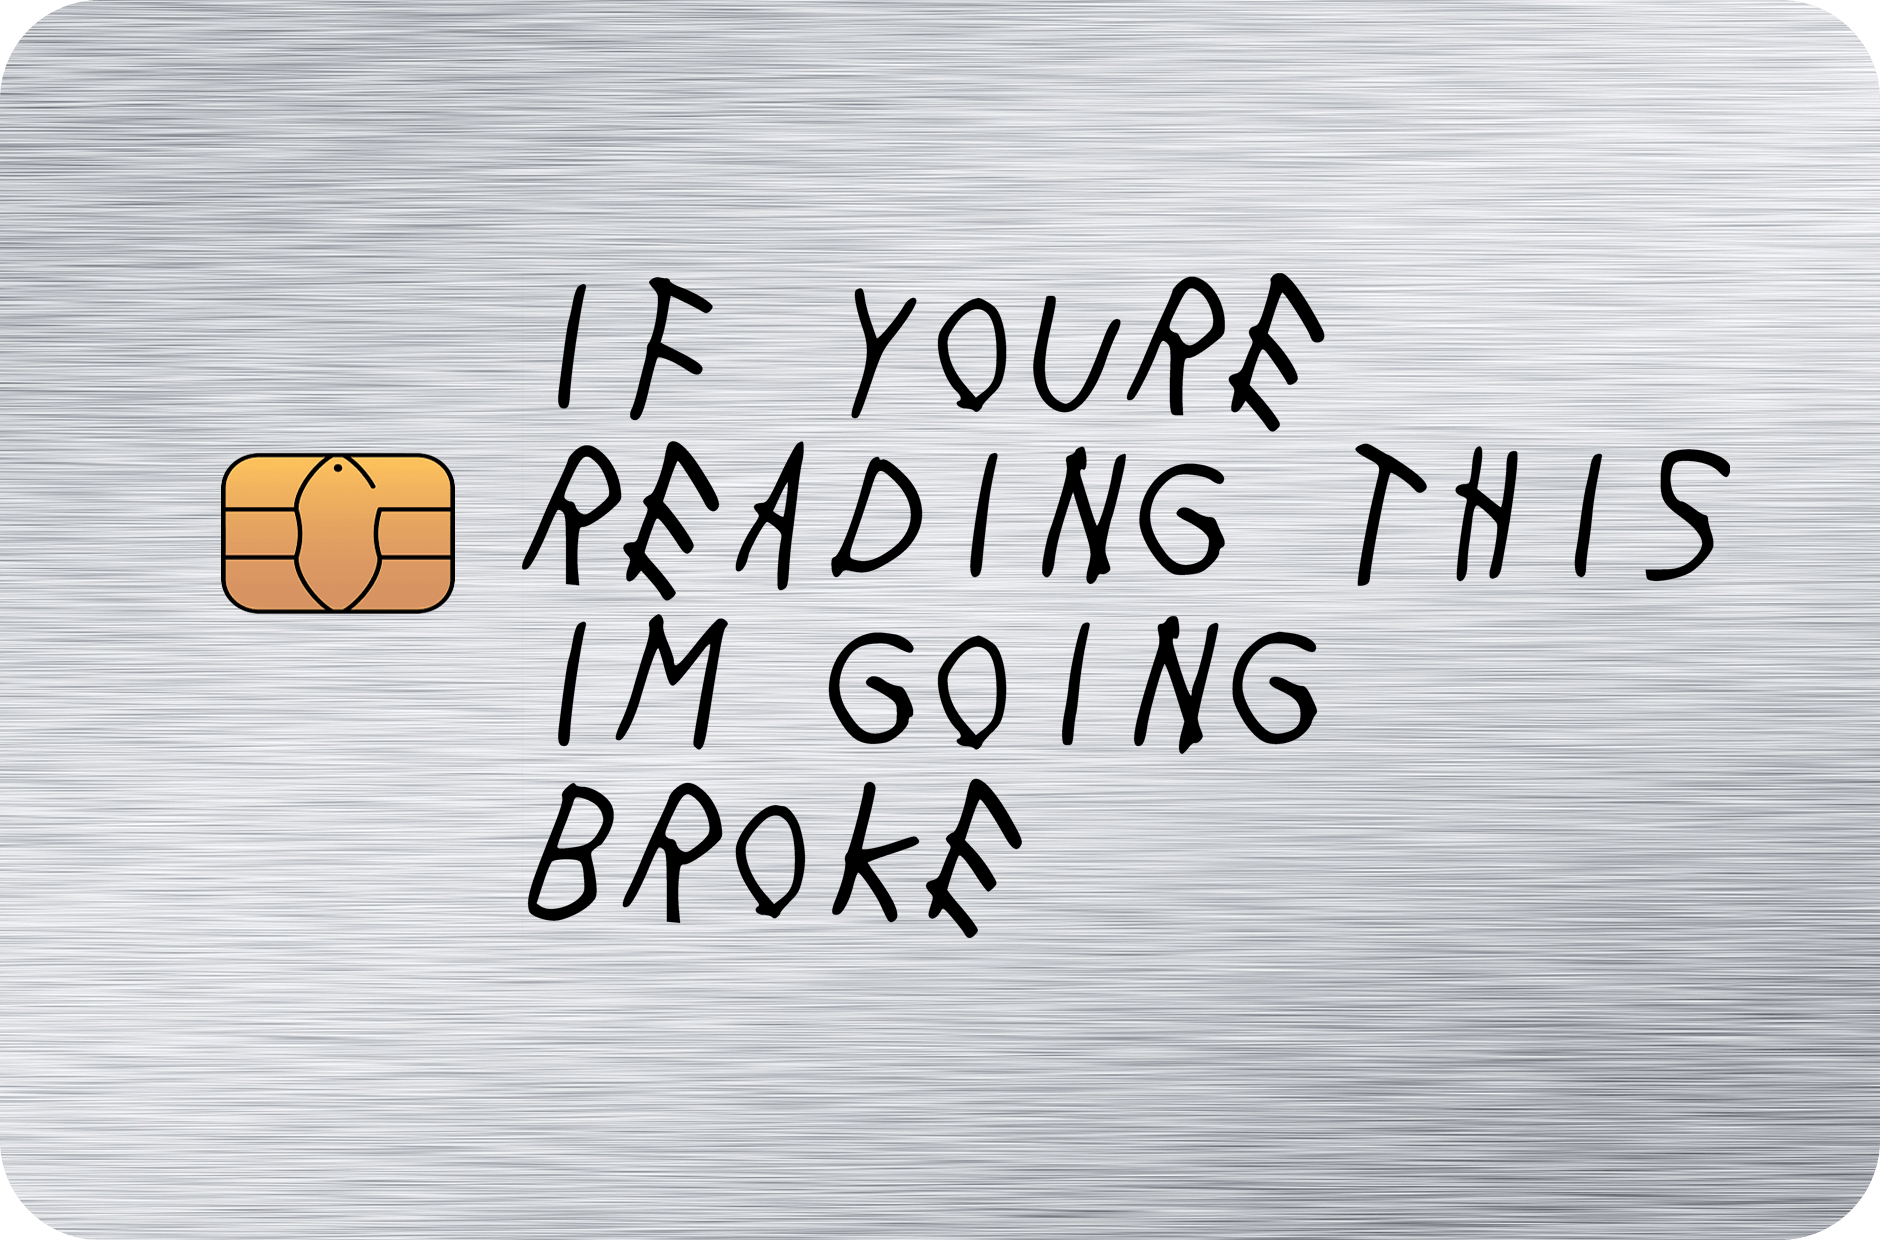 If You're Reading This, I'm Going Broke